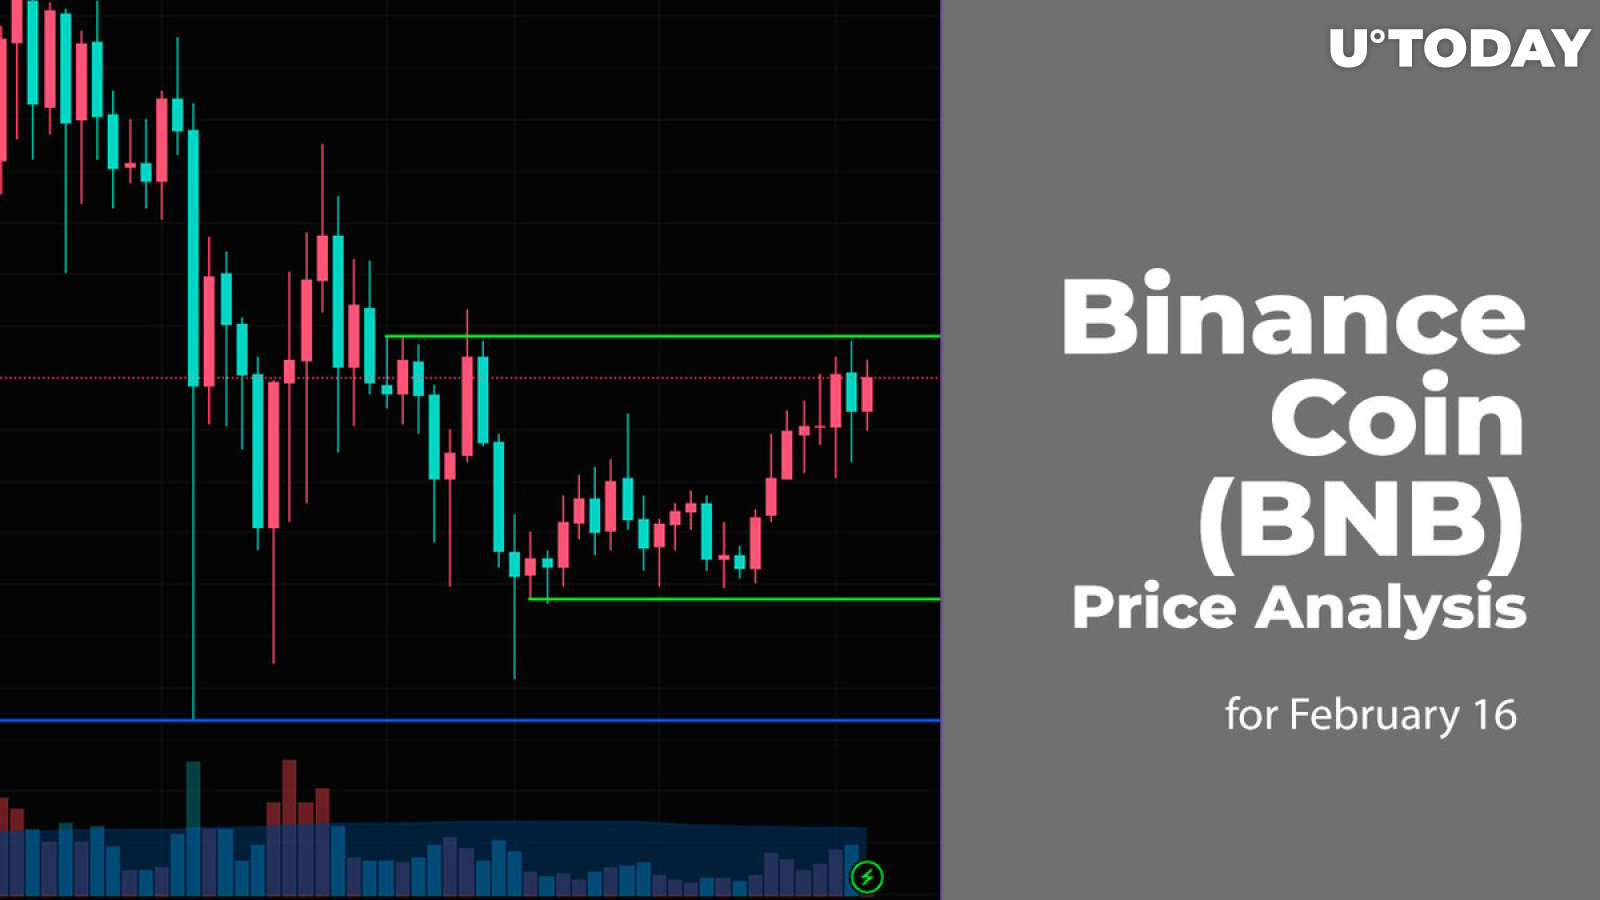 BNB Price Prediction up to $3, by - BNB Forecast - 